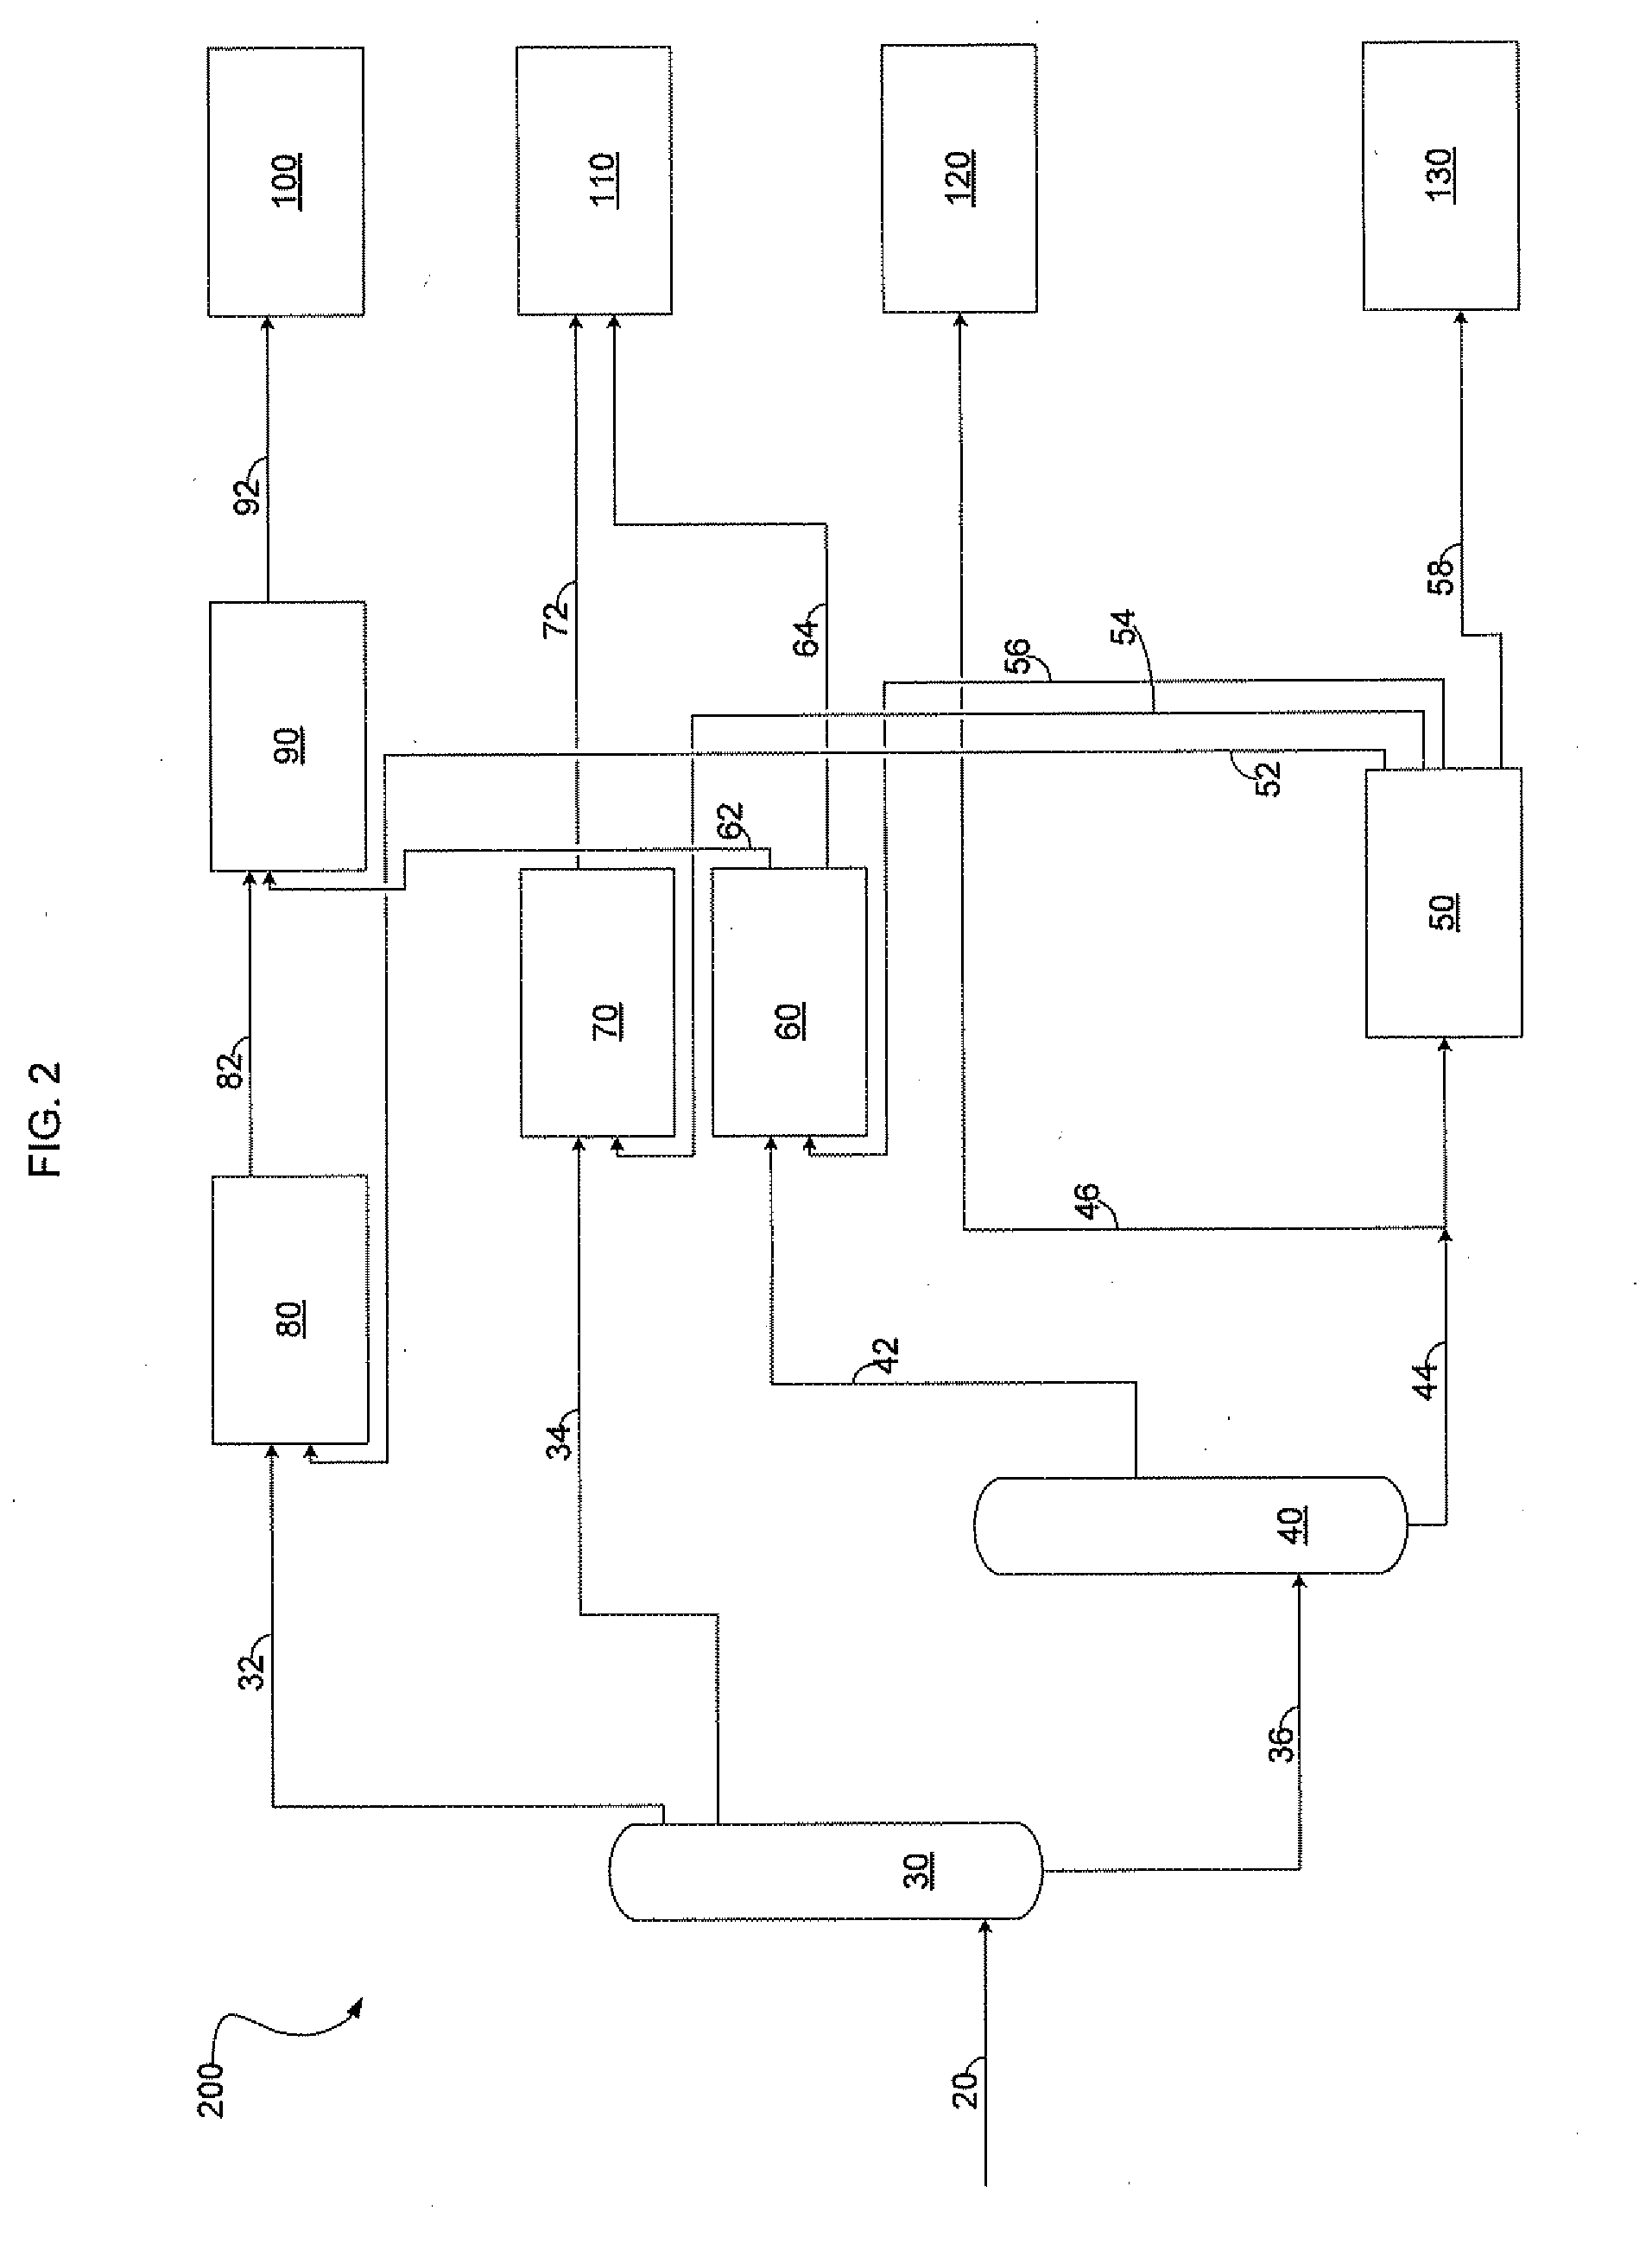 Alternative Process for Treatment of Heavy Crudes in a Coking Refinery